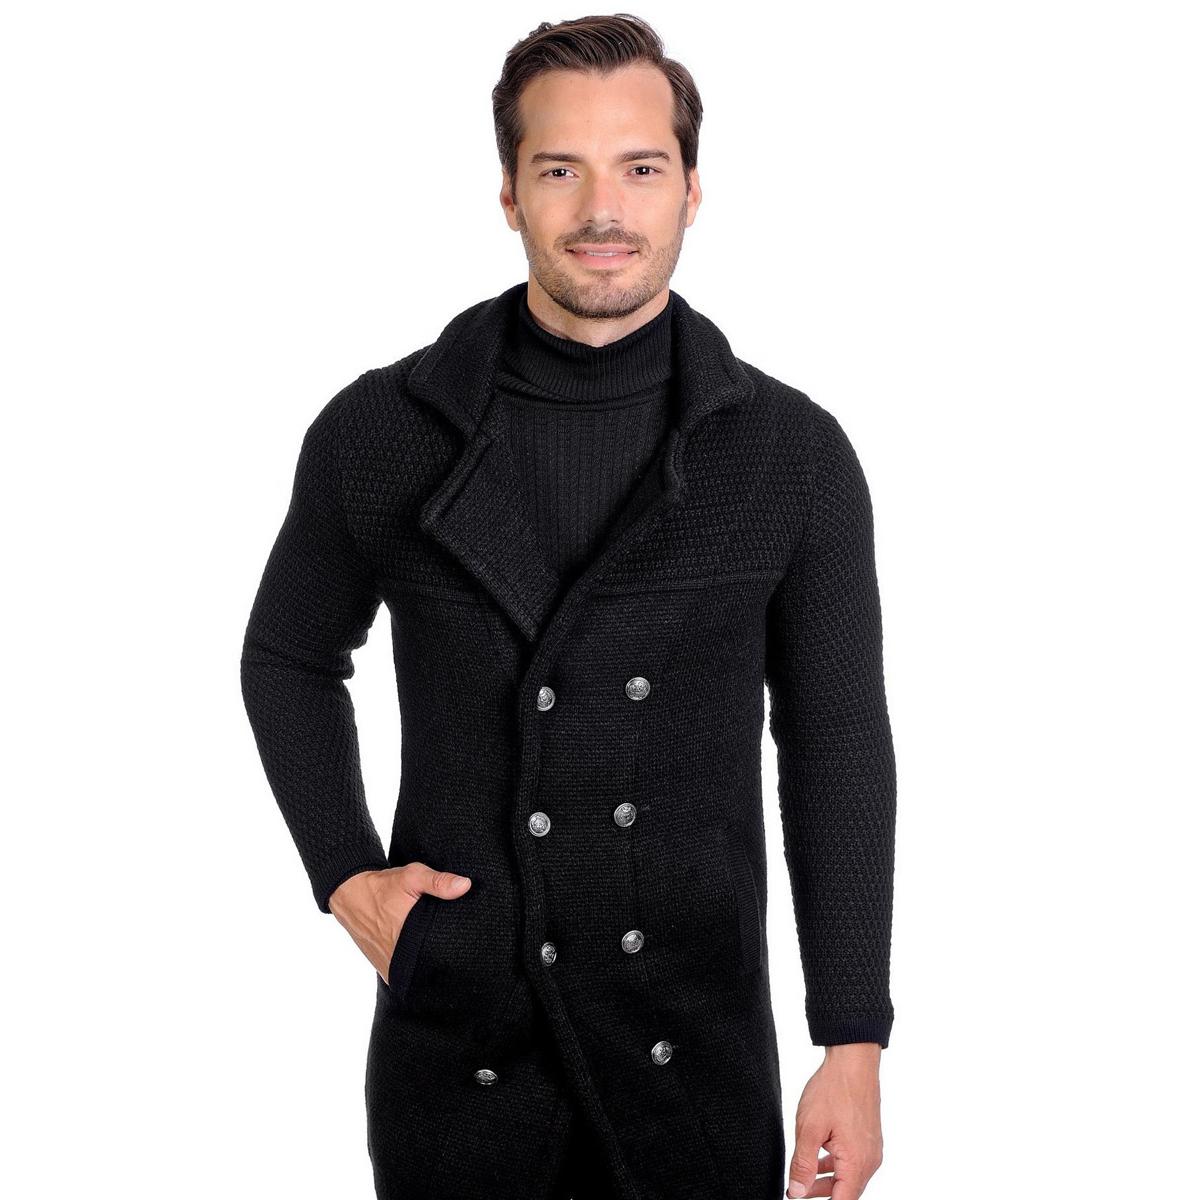 Men's Modern Double Breasted Pea Coat